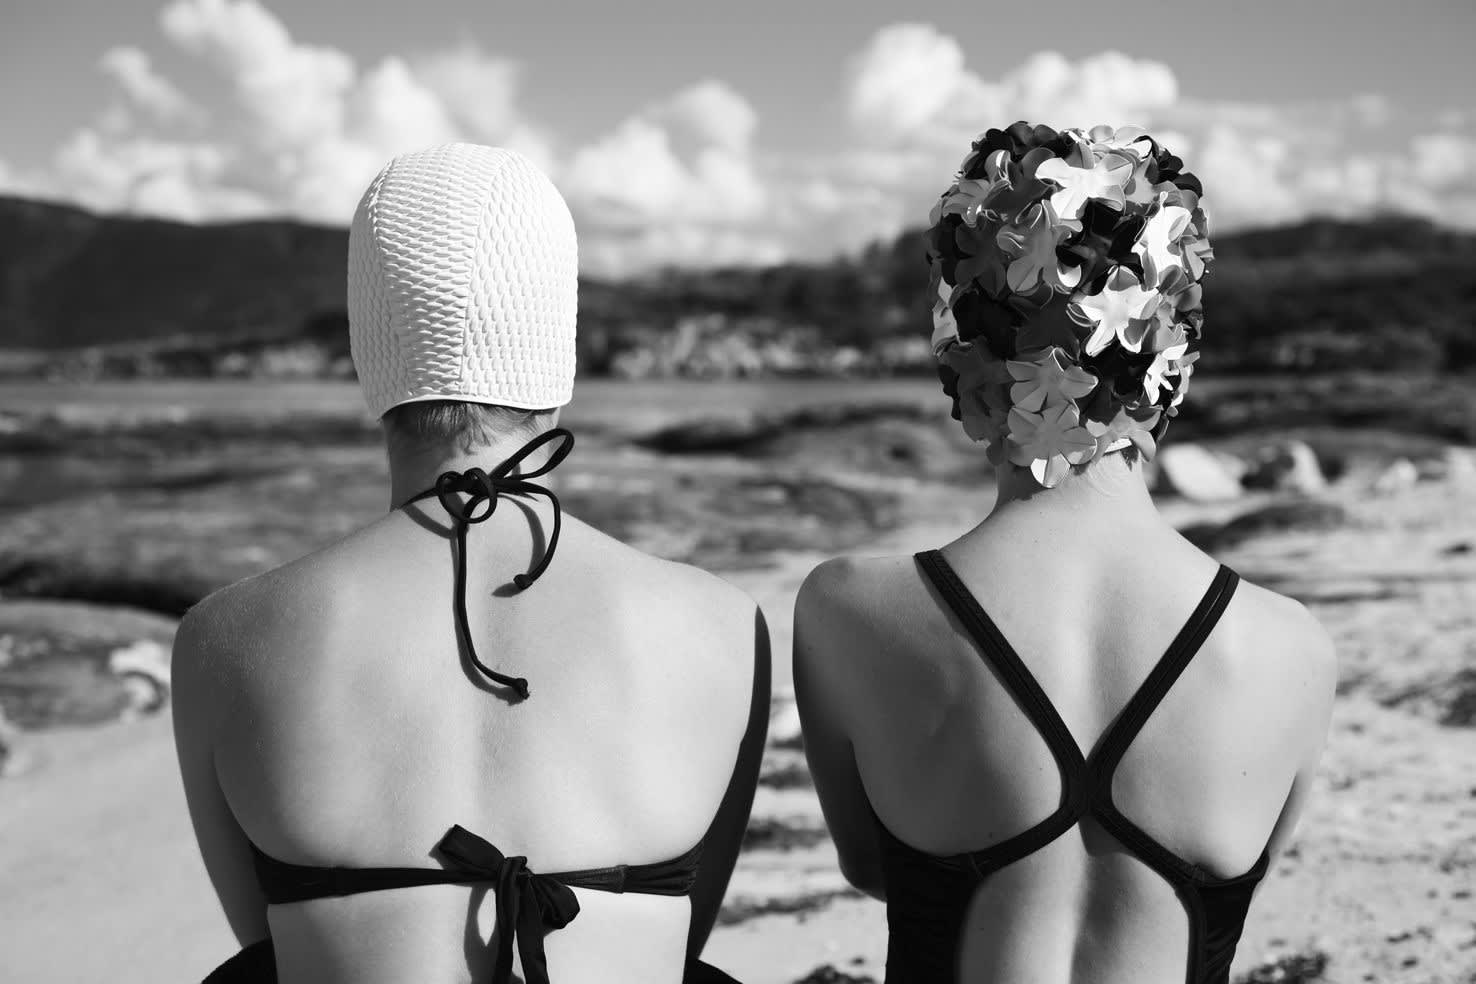 Black and white photograph two figures from behind dressed in swimwear, in front of a blurred landscape.